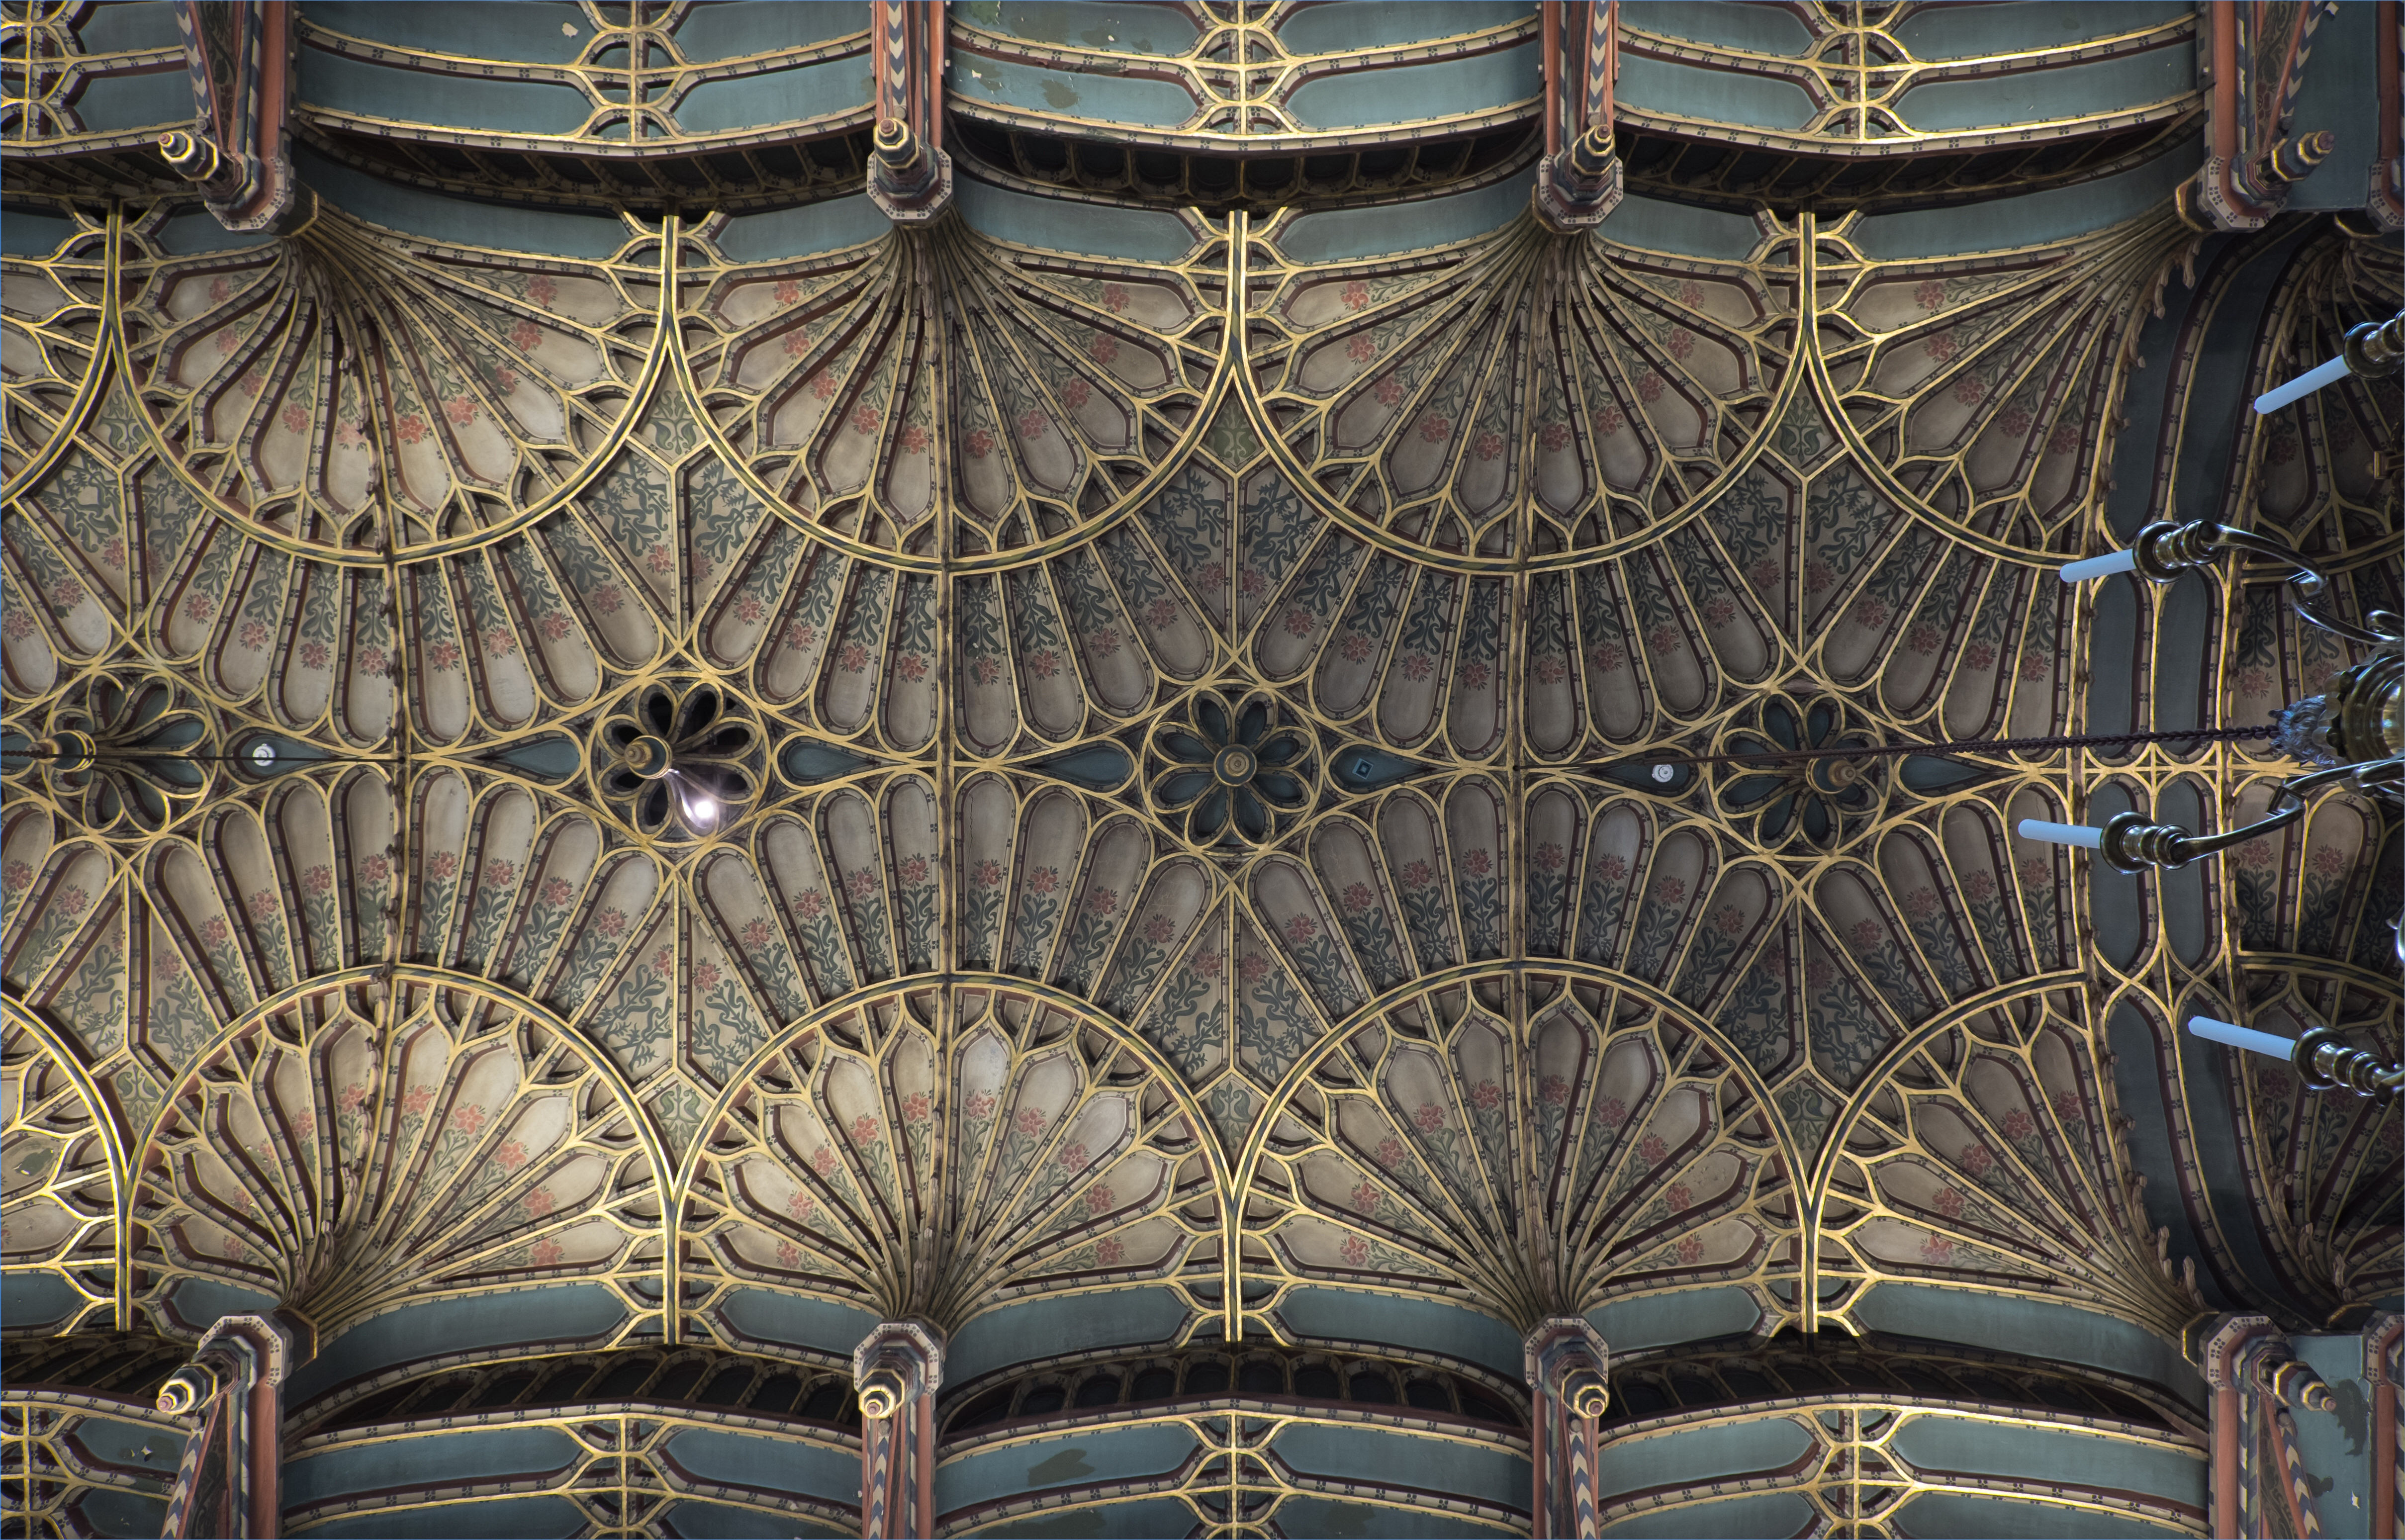 Brasenose College Chapel, University of Oxford, ceiling